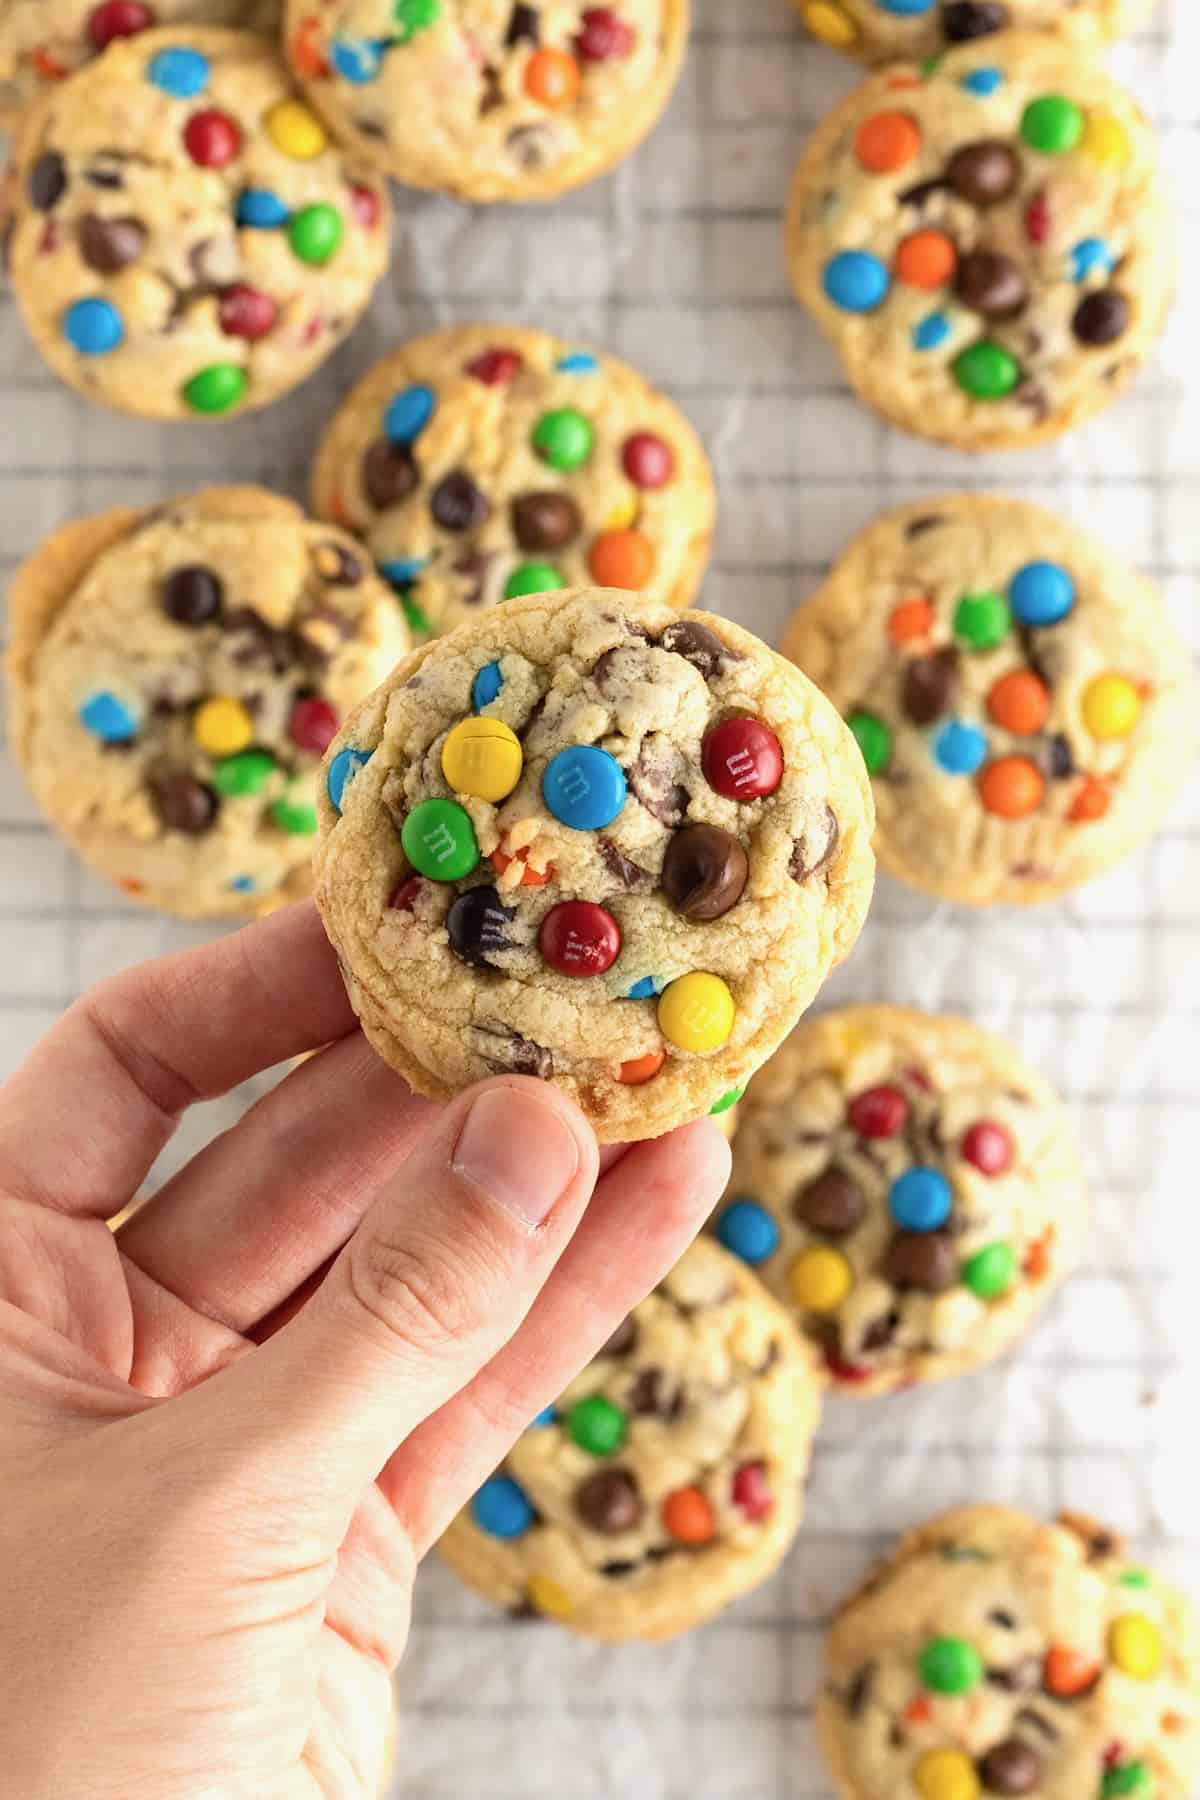 A hand holding a cookie with cookies with M&Ms and chocolate chips in it.